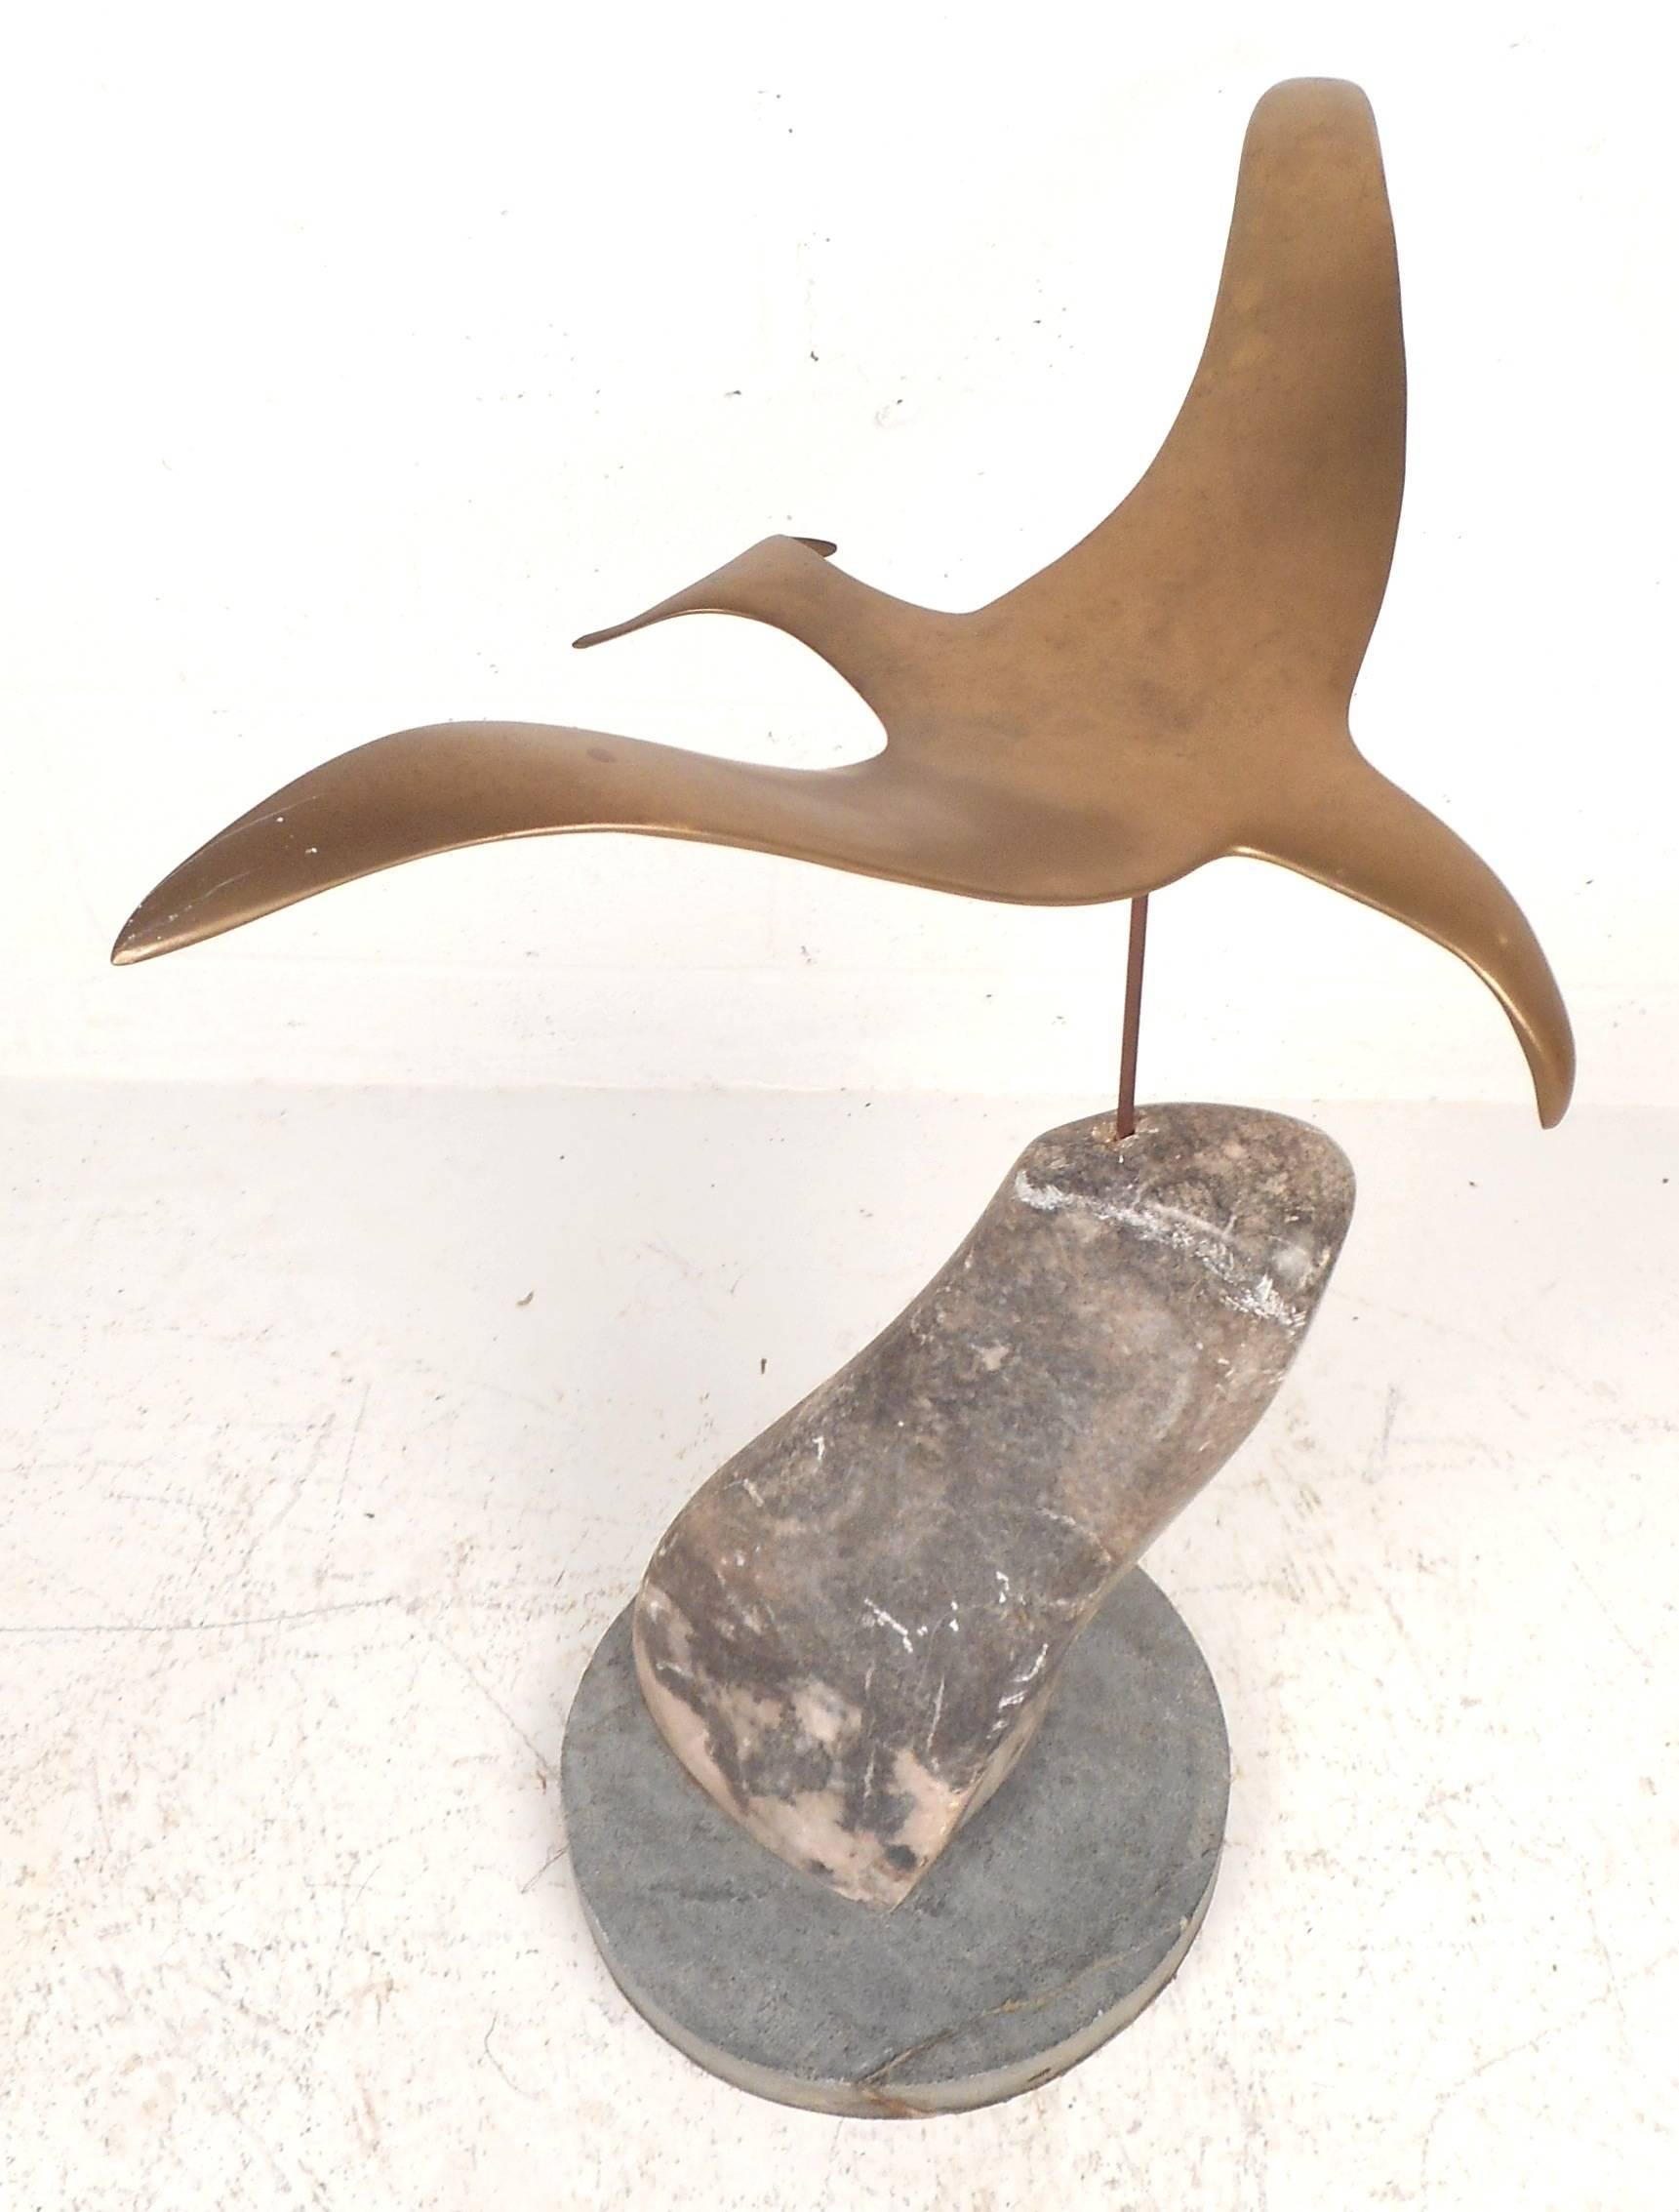 Gorgeous vintage modern sculpture features a heavy solid brass seagull sitting on top of a thick marble slab. The sturdy round marble base and detailed design show quality craftsmanship making it the perfect addition to any modern interior. Please